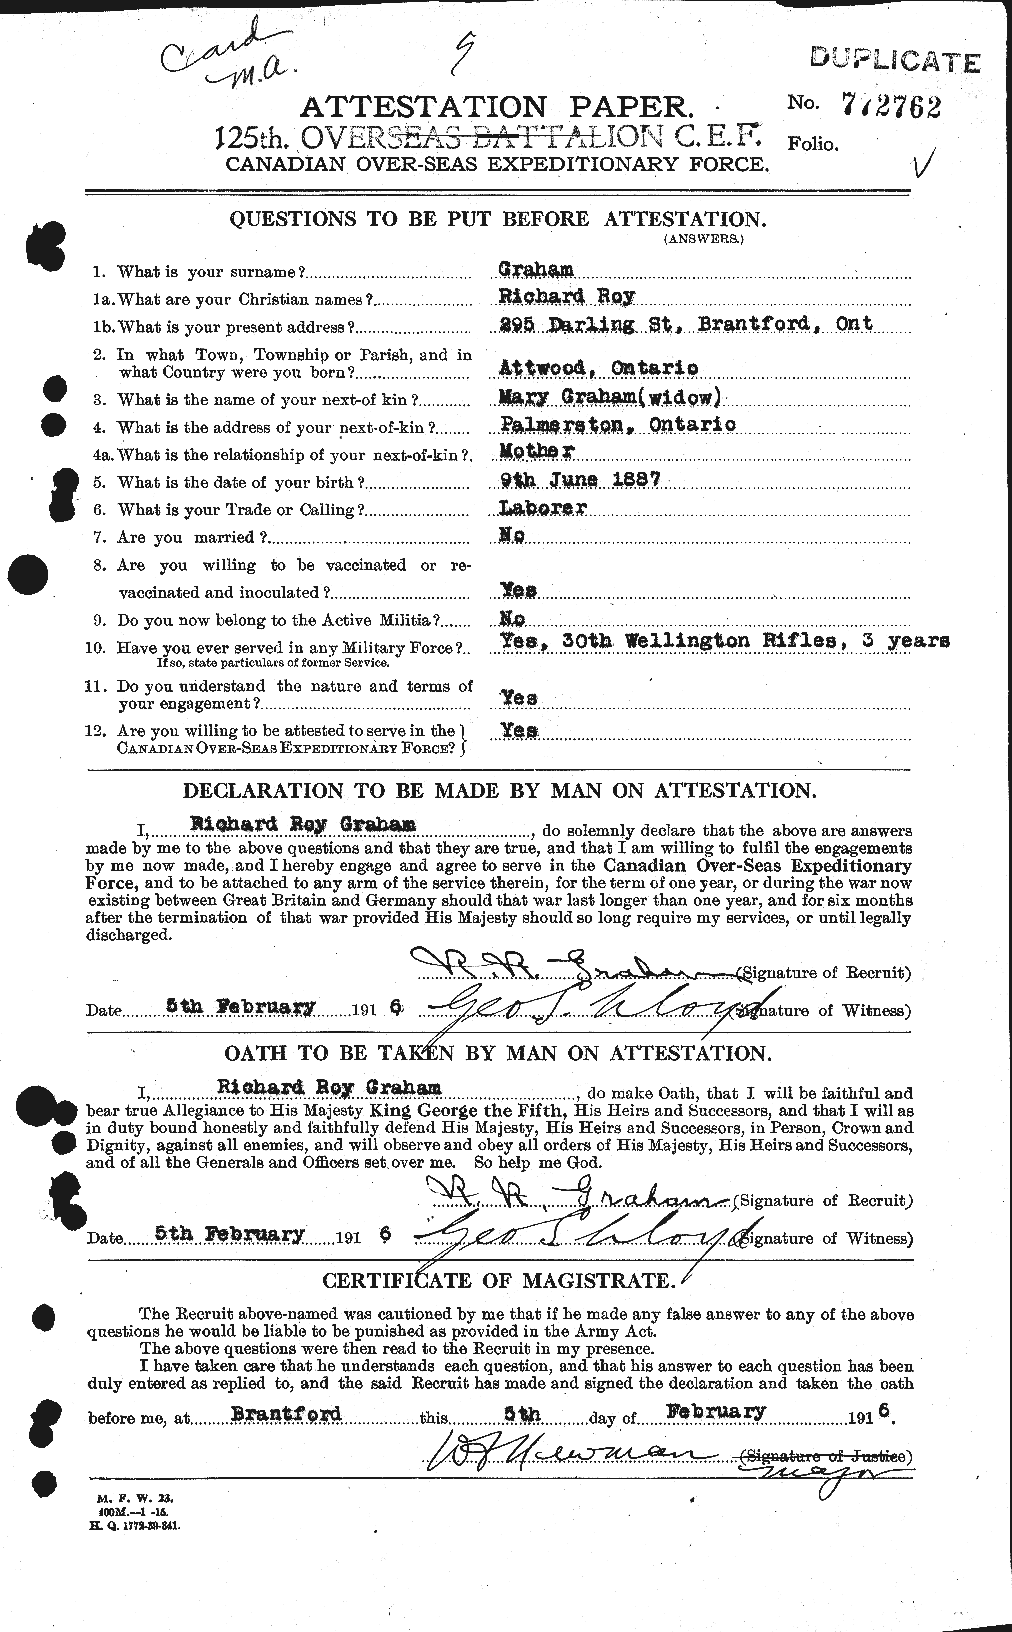 Personnel Records of the First World War - CEF 359371a